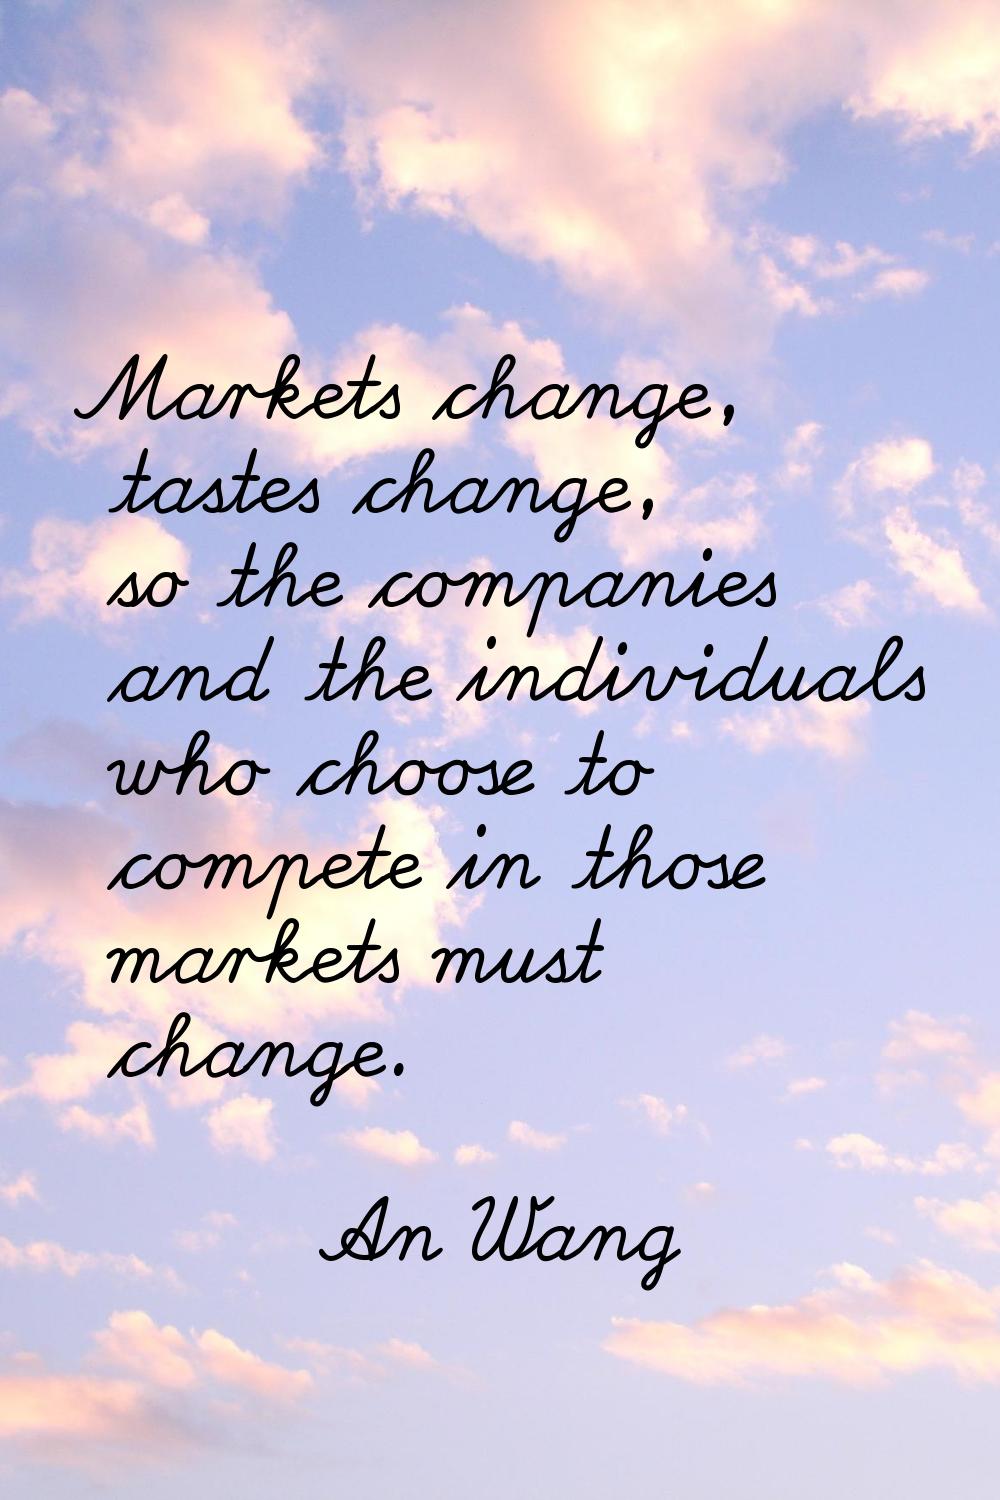 Markets change, tastes change, so the companies and the individuals who choose to compete in those 